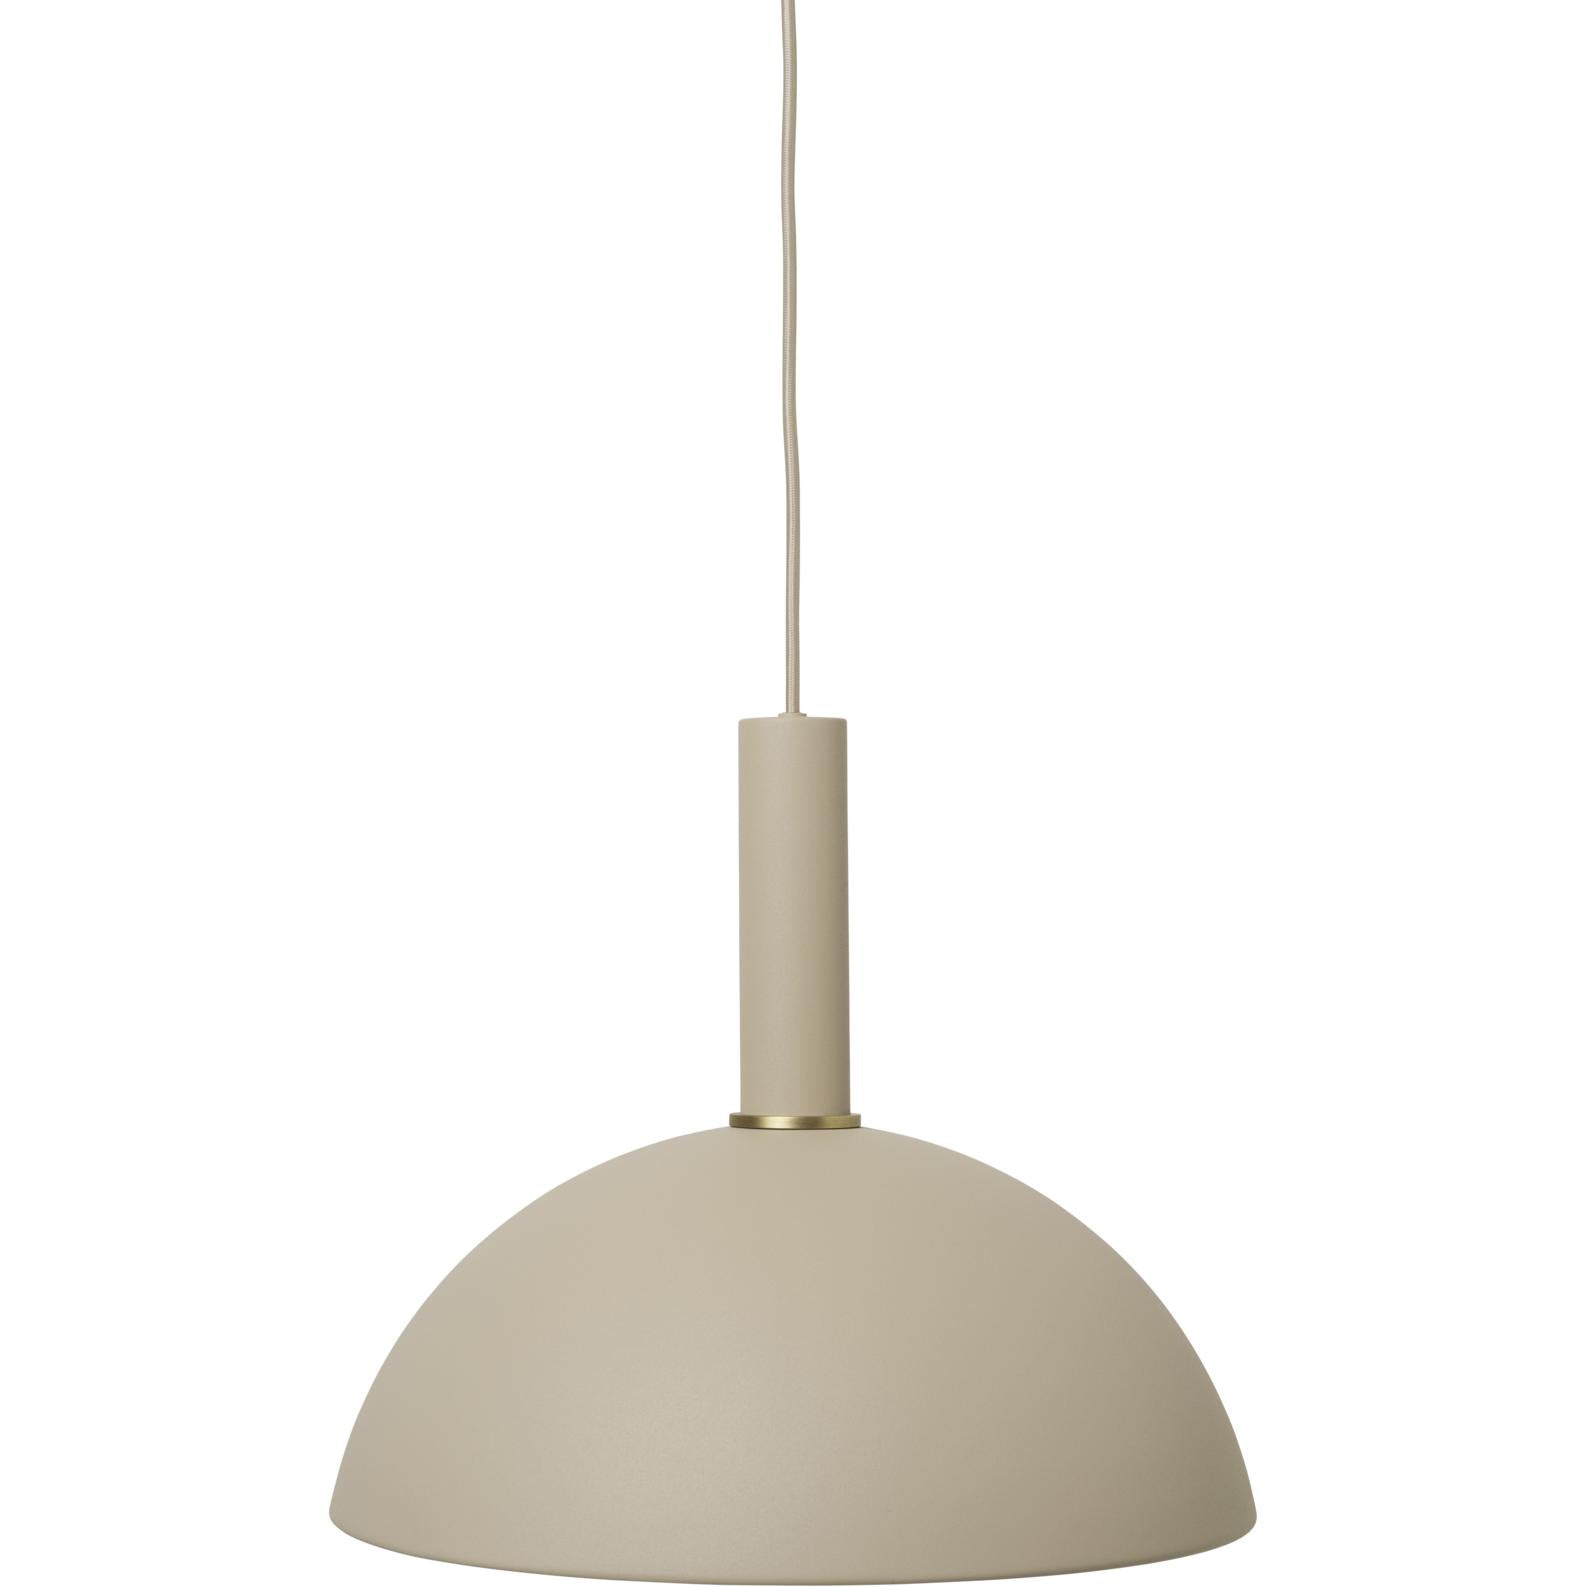 Ferm Living Dome Lampshade, Cashmere